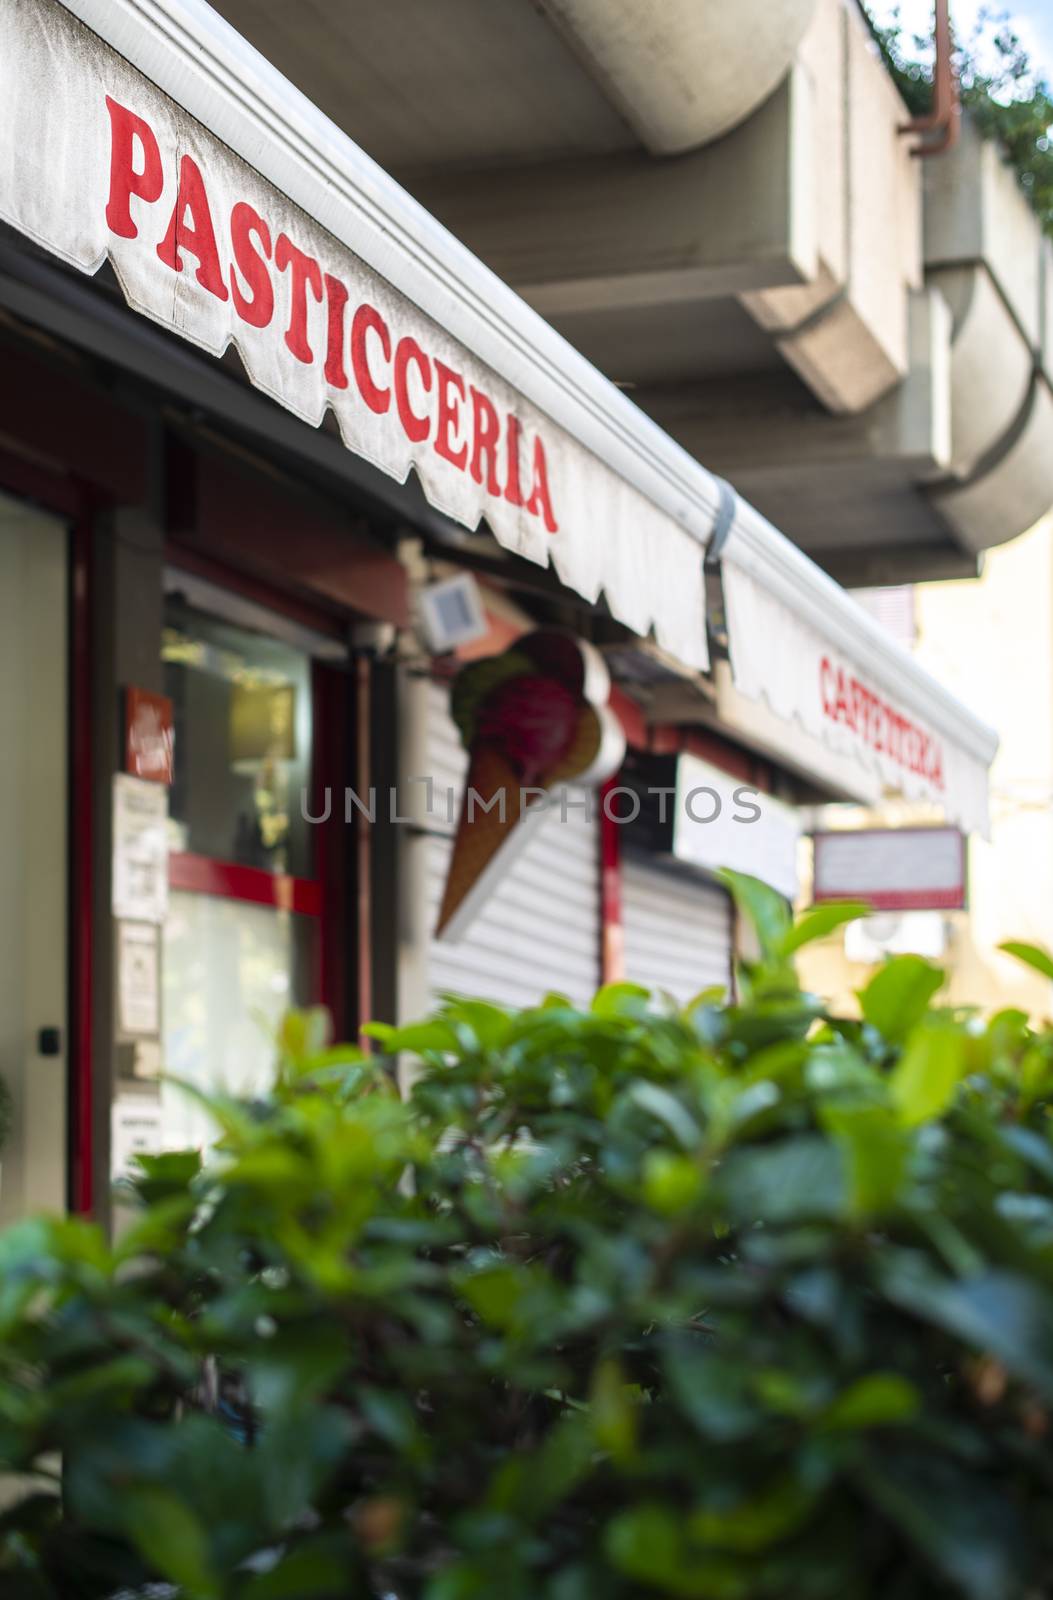 Text pasticceria on sunblind. Italian pastry shop. Facade on pastry shop.  Green foliage in front of cafe and sweets shop.